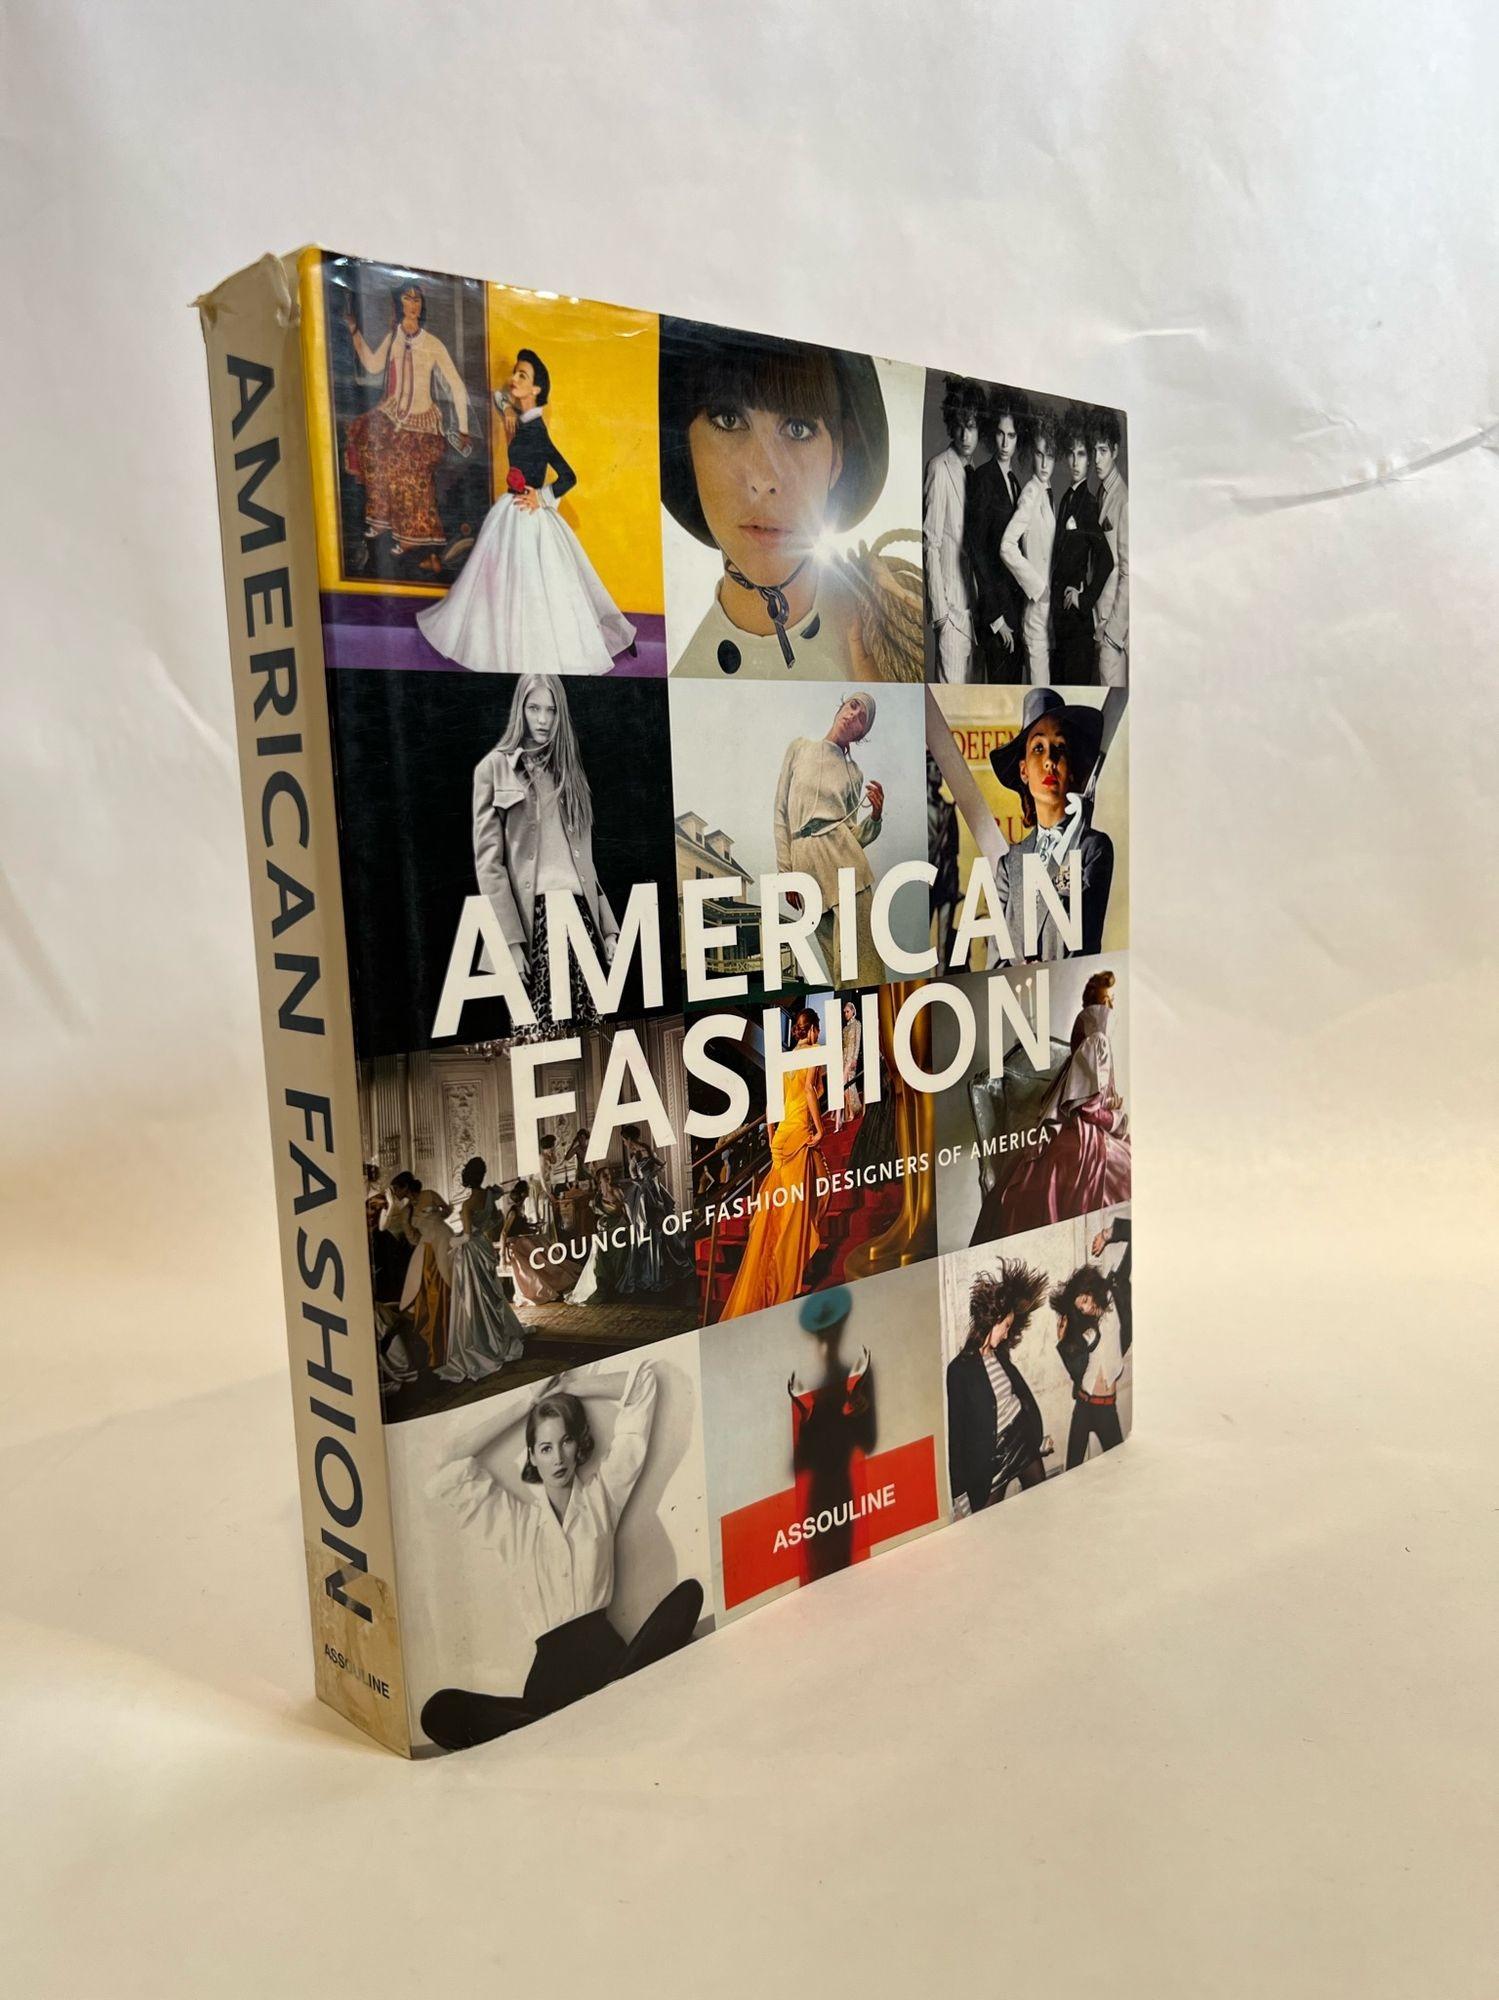 American Fashion Hardcover Coffee Table Book Assouline 2007.
American Fashion by Assouline, published in 2007 is a comprehensive and beautifully illustrated overview of the history of fashion in the United